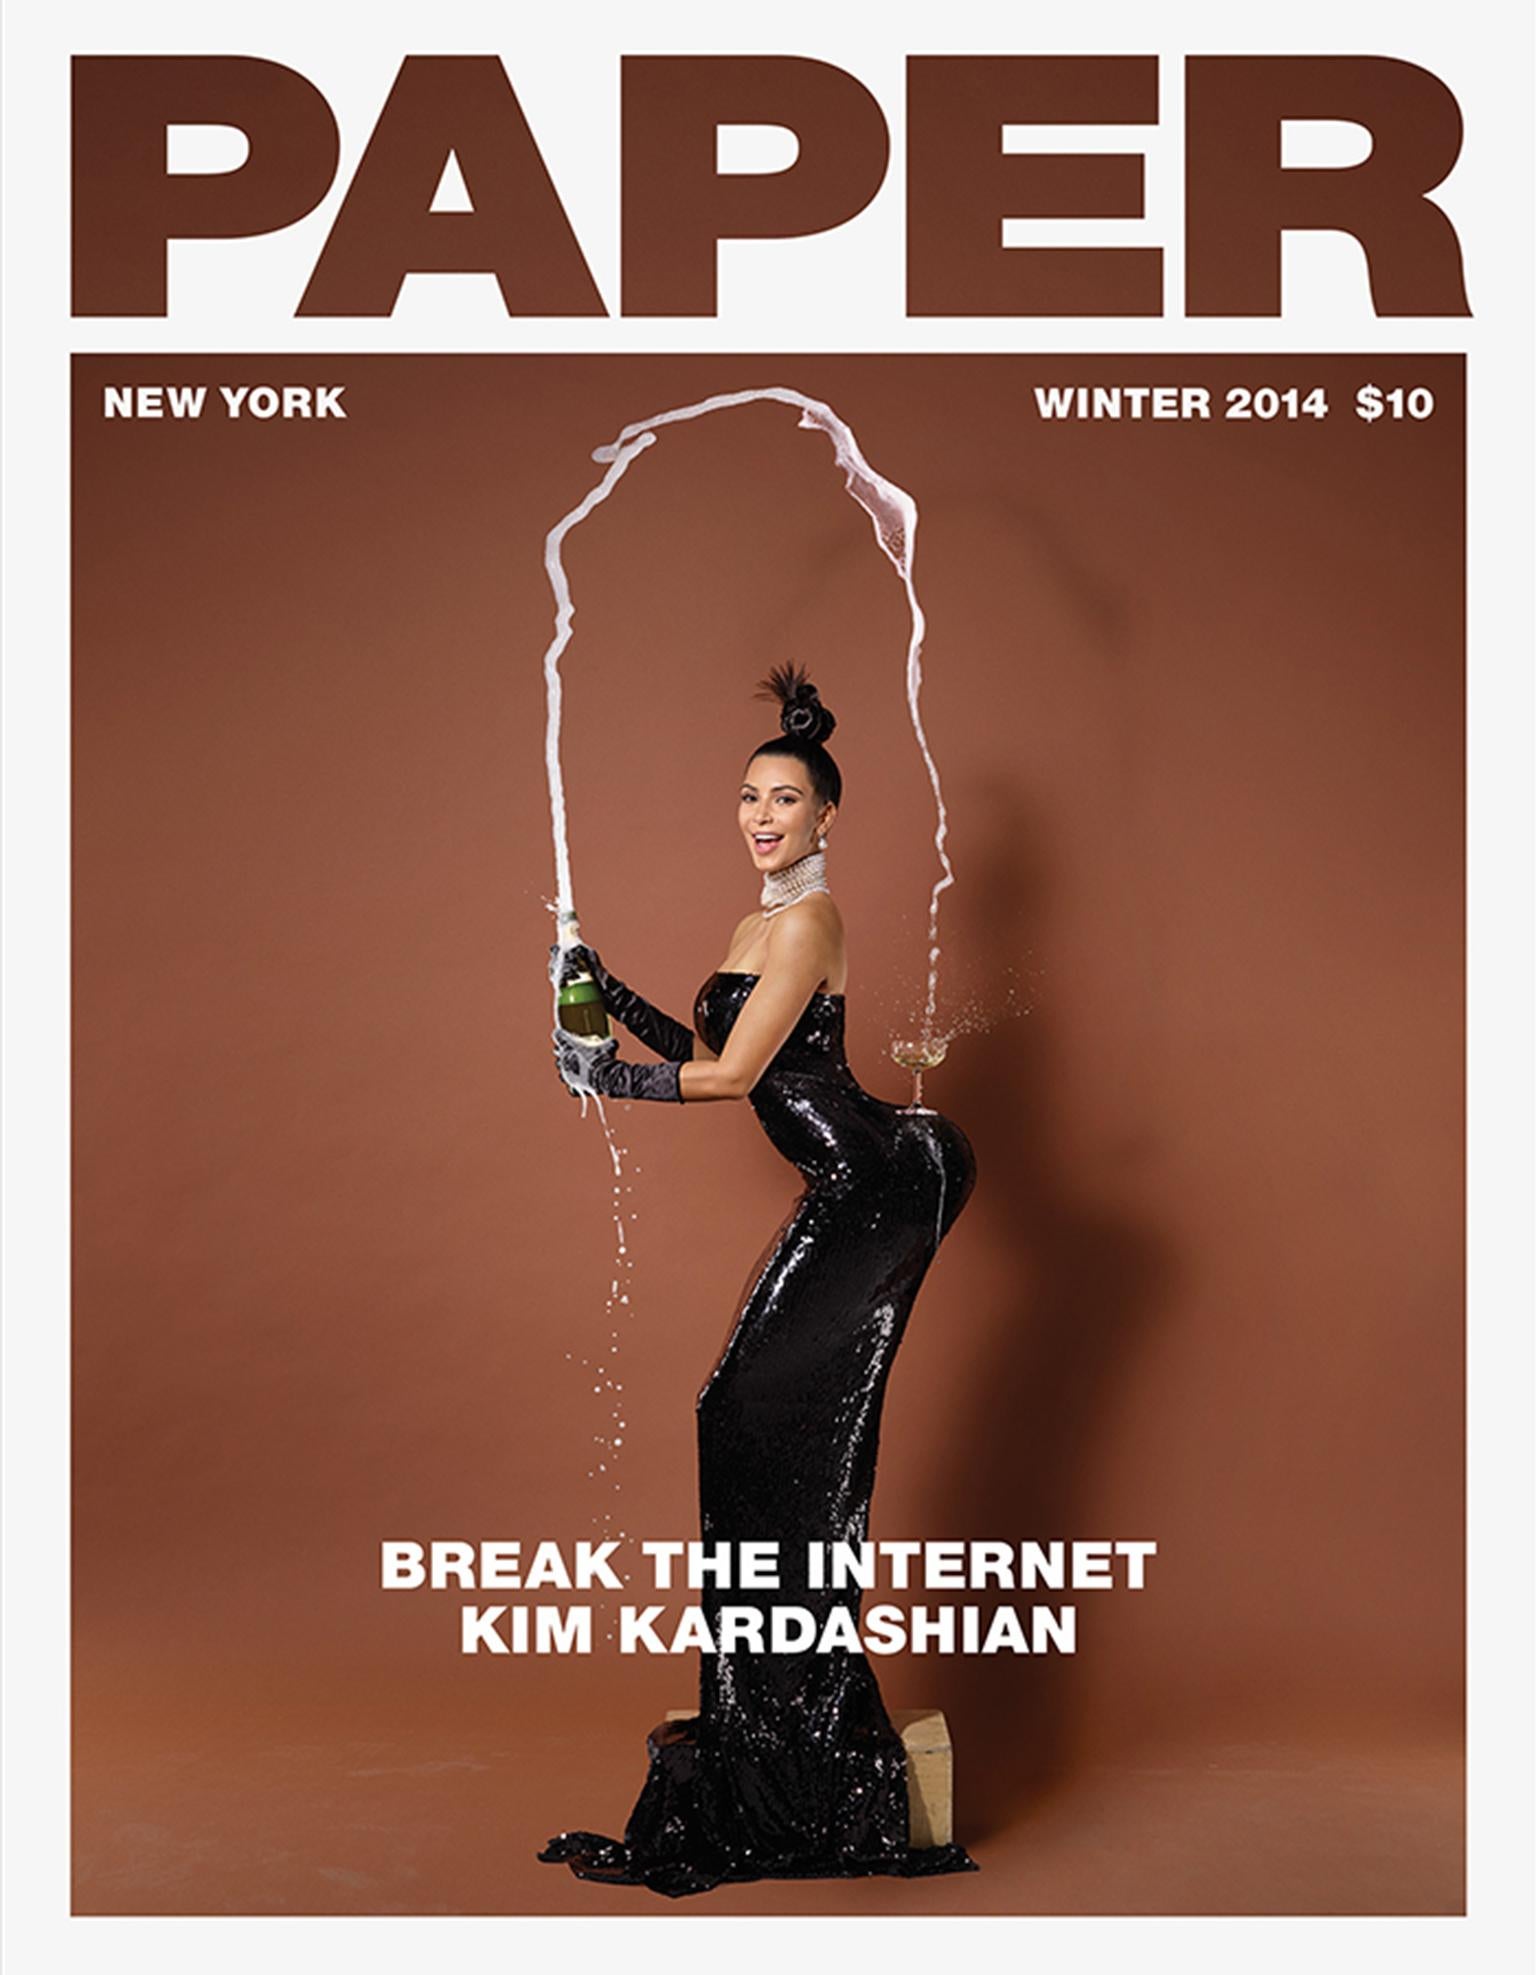 Kim Kardashian Anal Fucking - Kim Kardashian: Papermag pictures really could break the internet | The  Independent | The Independent